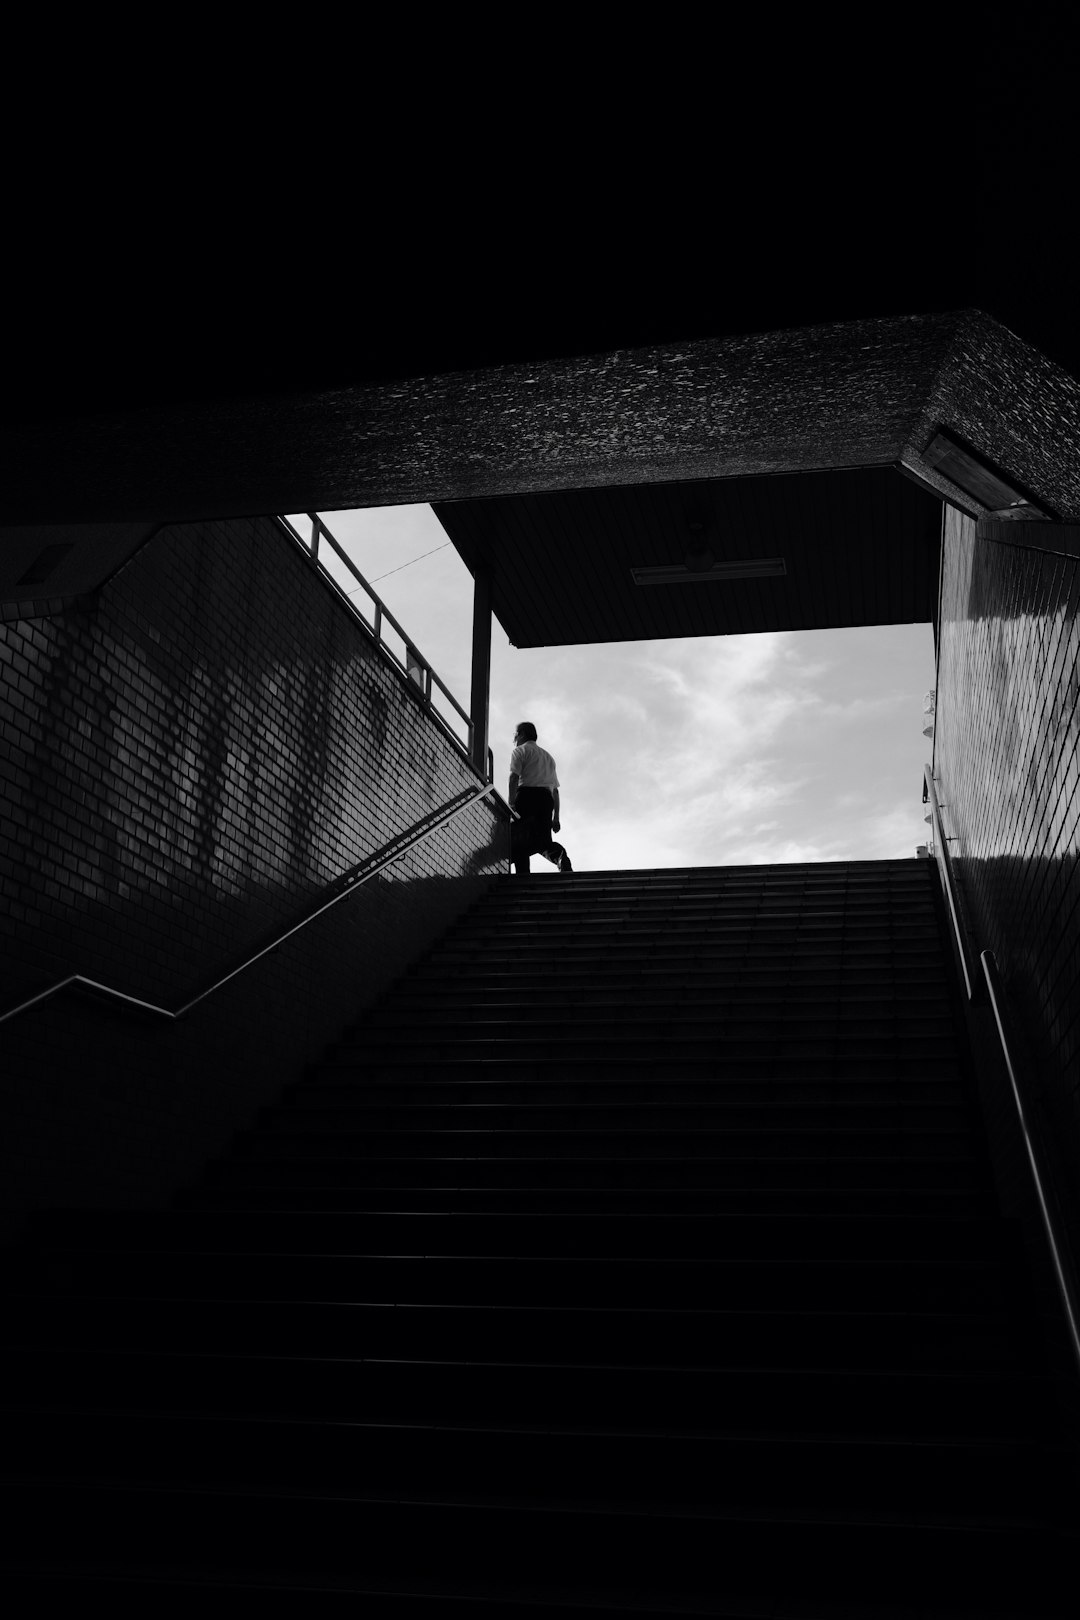 grayscale photo of man walking on stairs